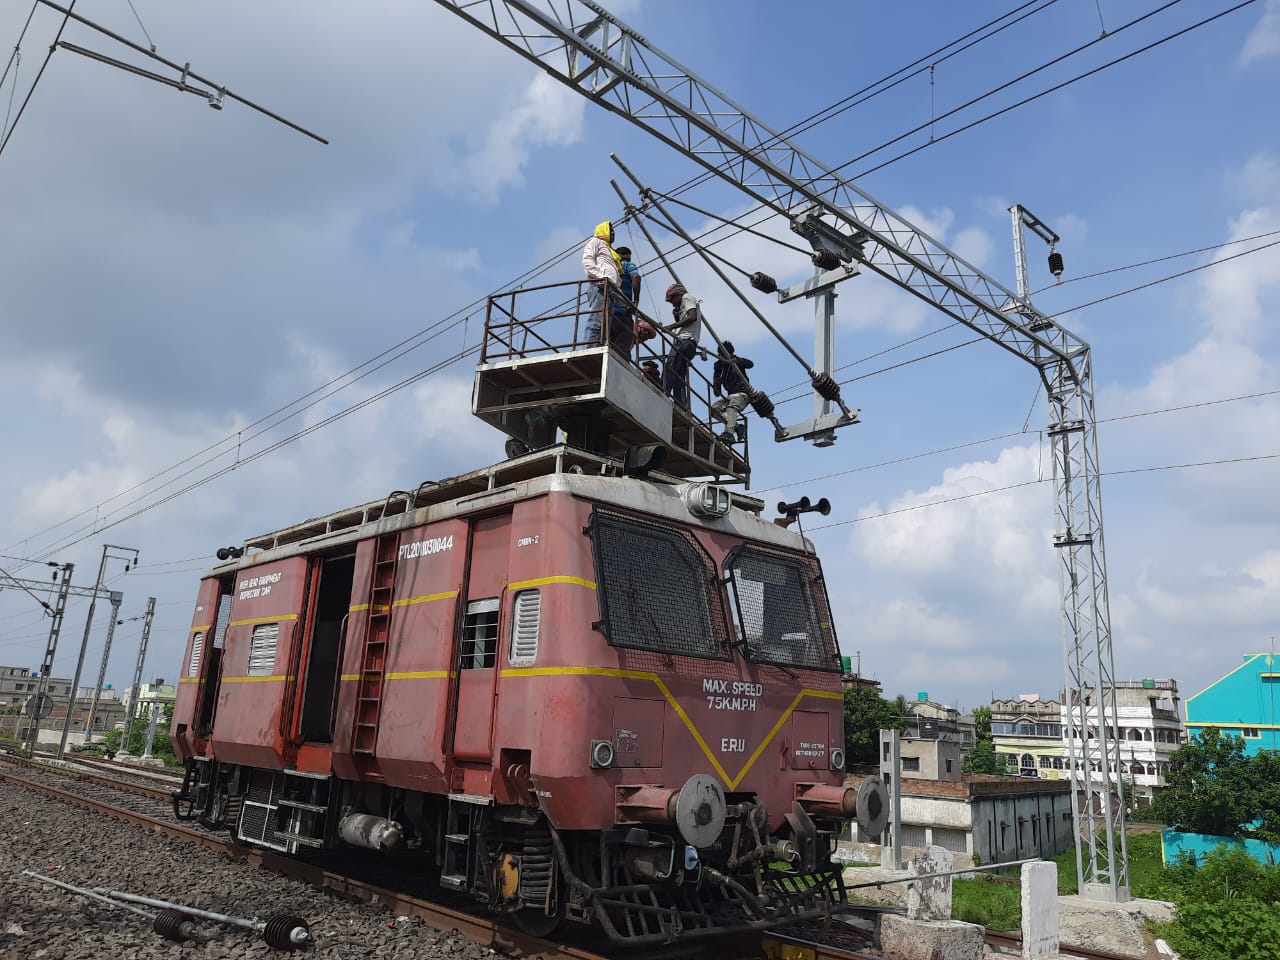 MAJOR MILESTONE: FULL SWING 3RD LINE COMMISSIONING WORK IN RAMPURHAT – CHATRA SECTION